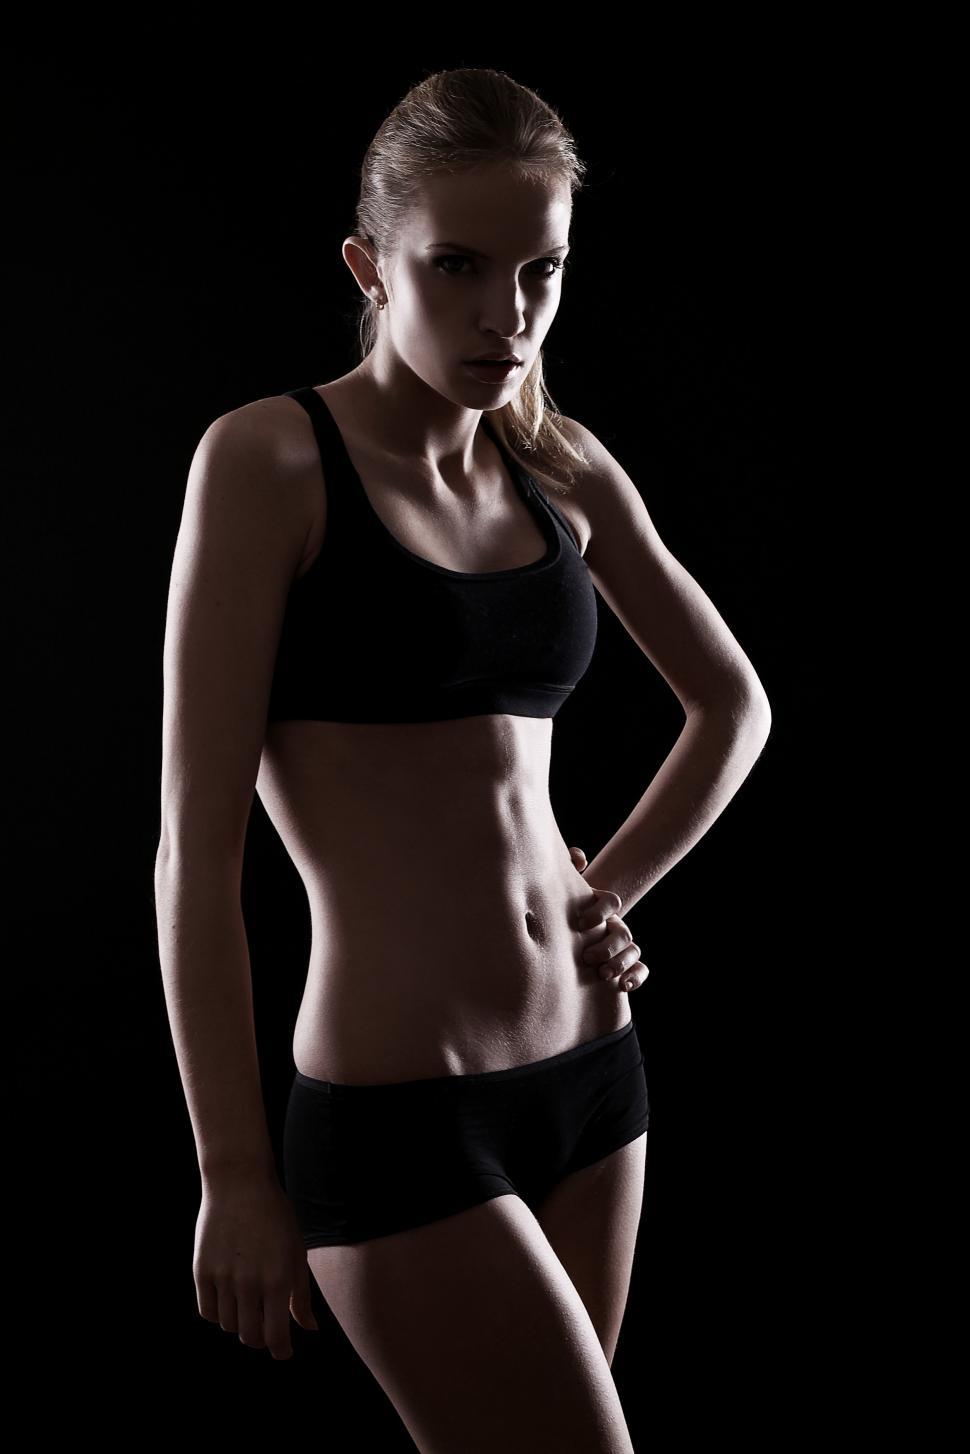 Free Image of Young fit woman in dark setting 